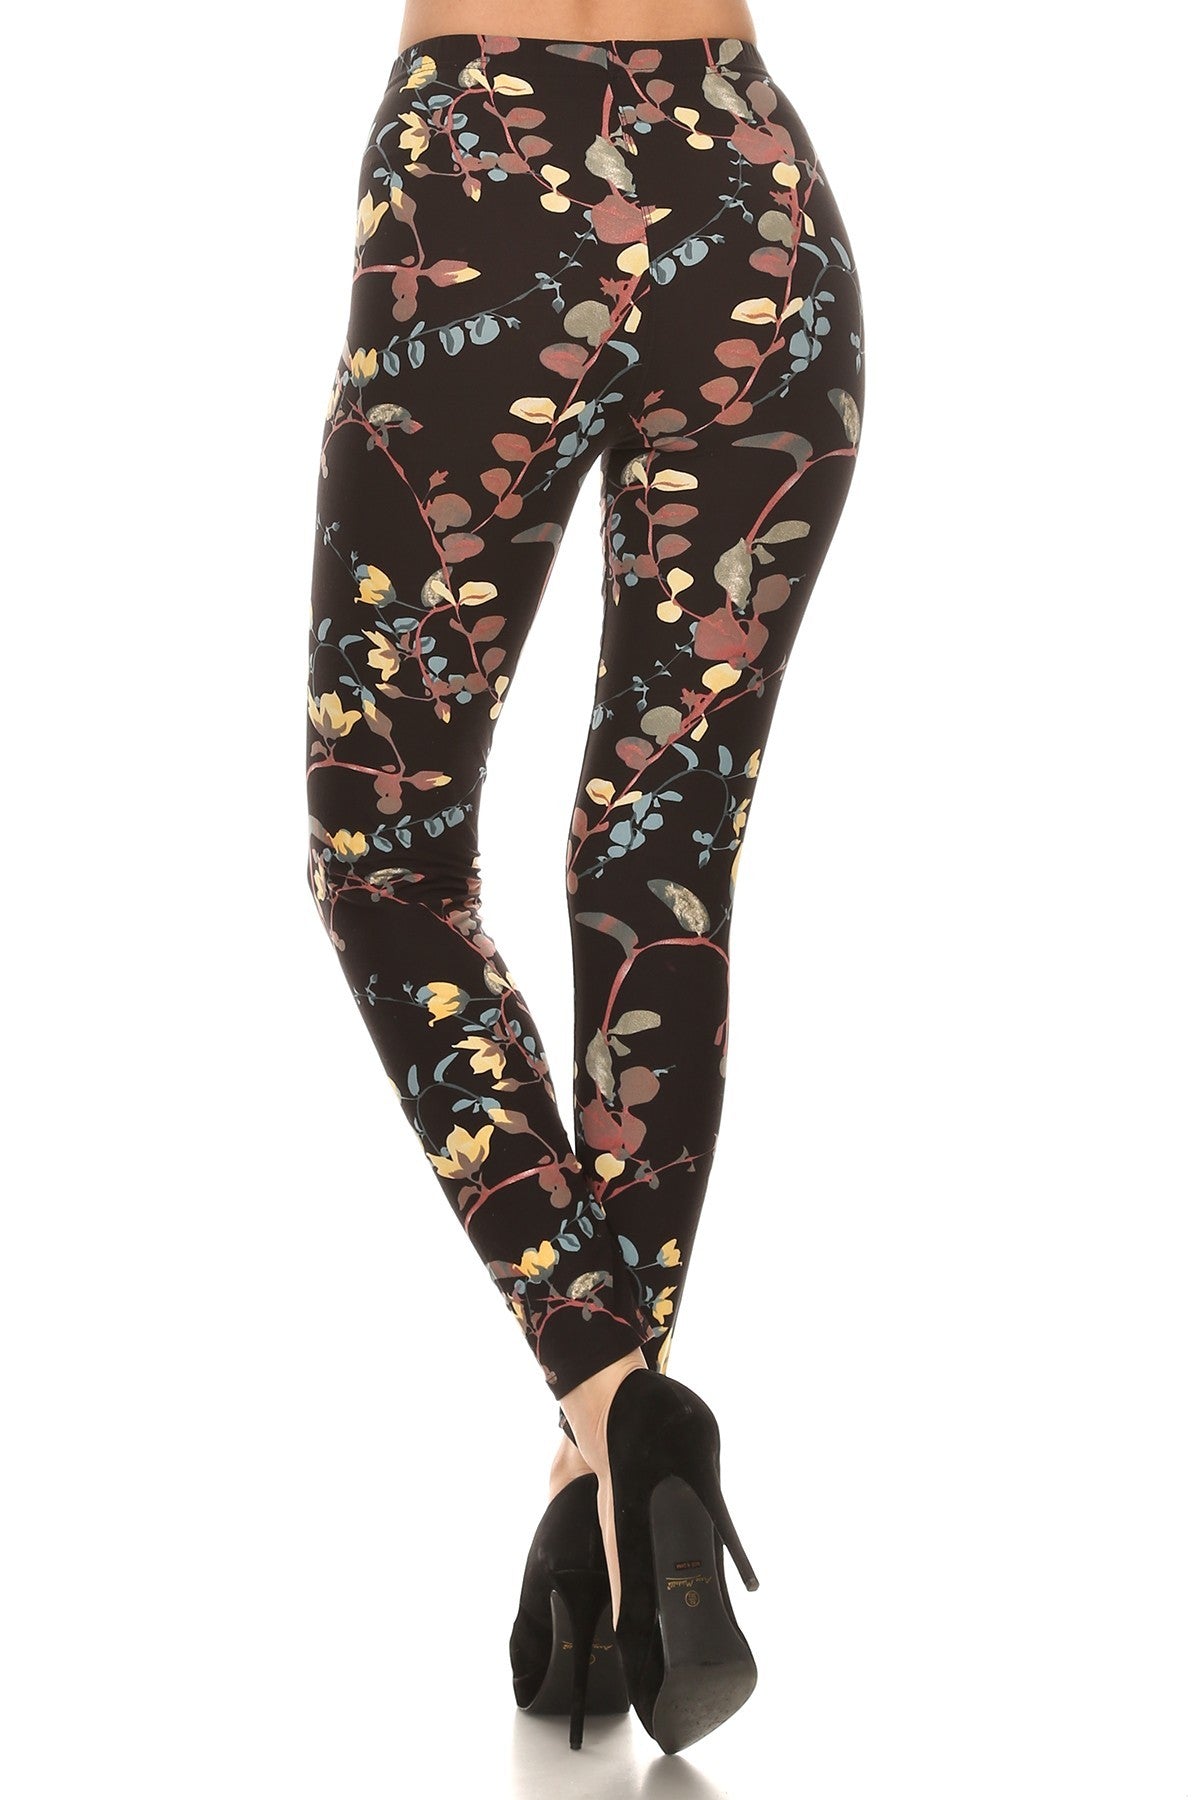 One size Vine Printed High Waisted Knit Leggings In Skinny Fit With Elastic Waistband